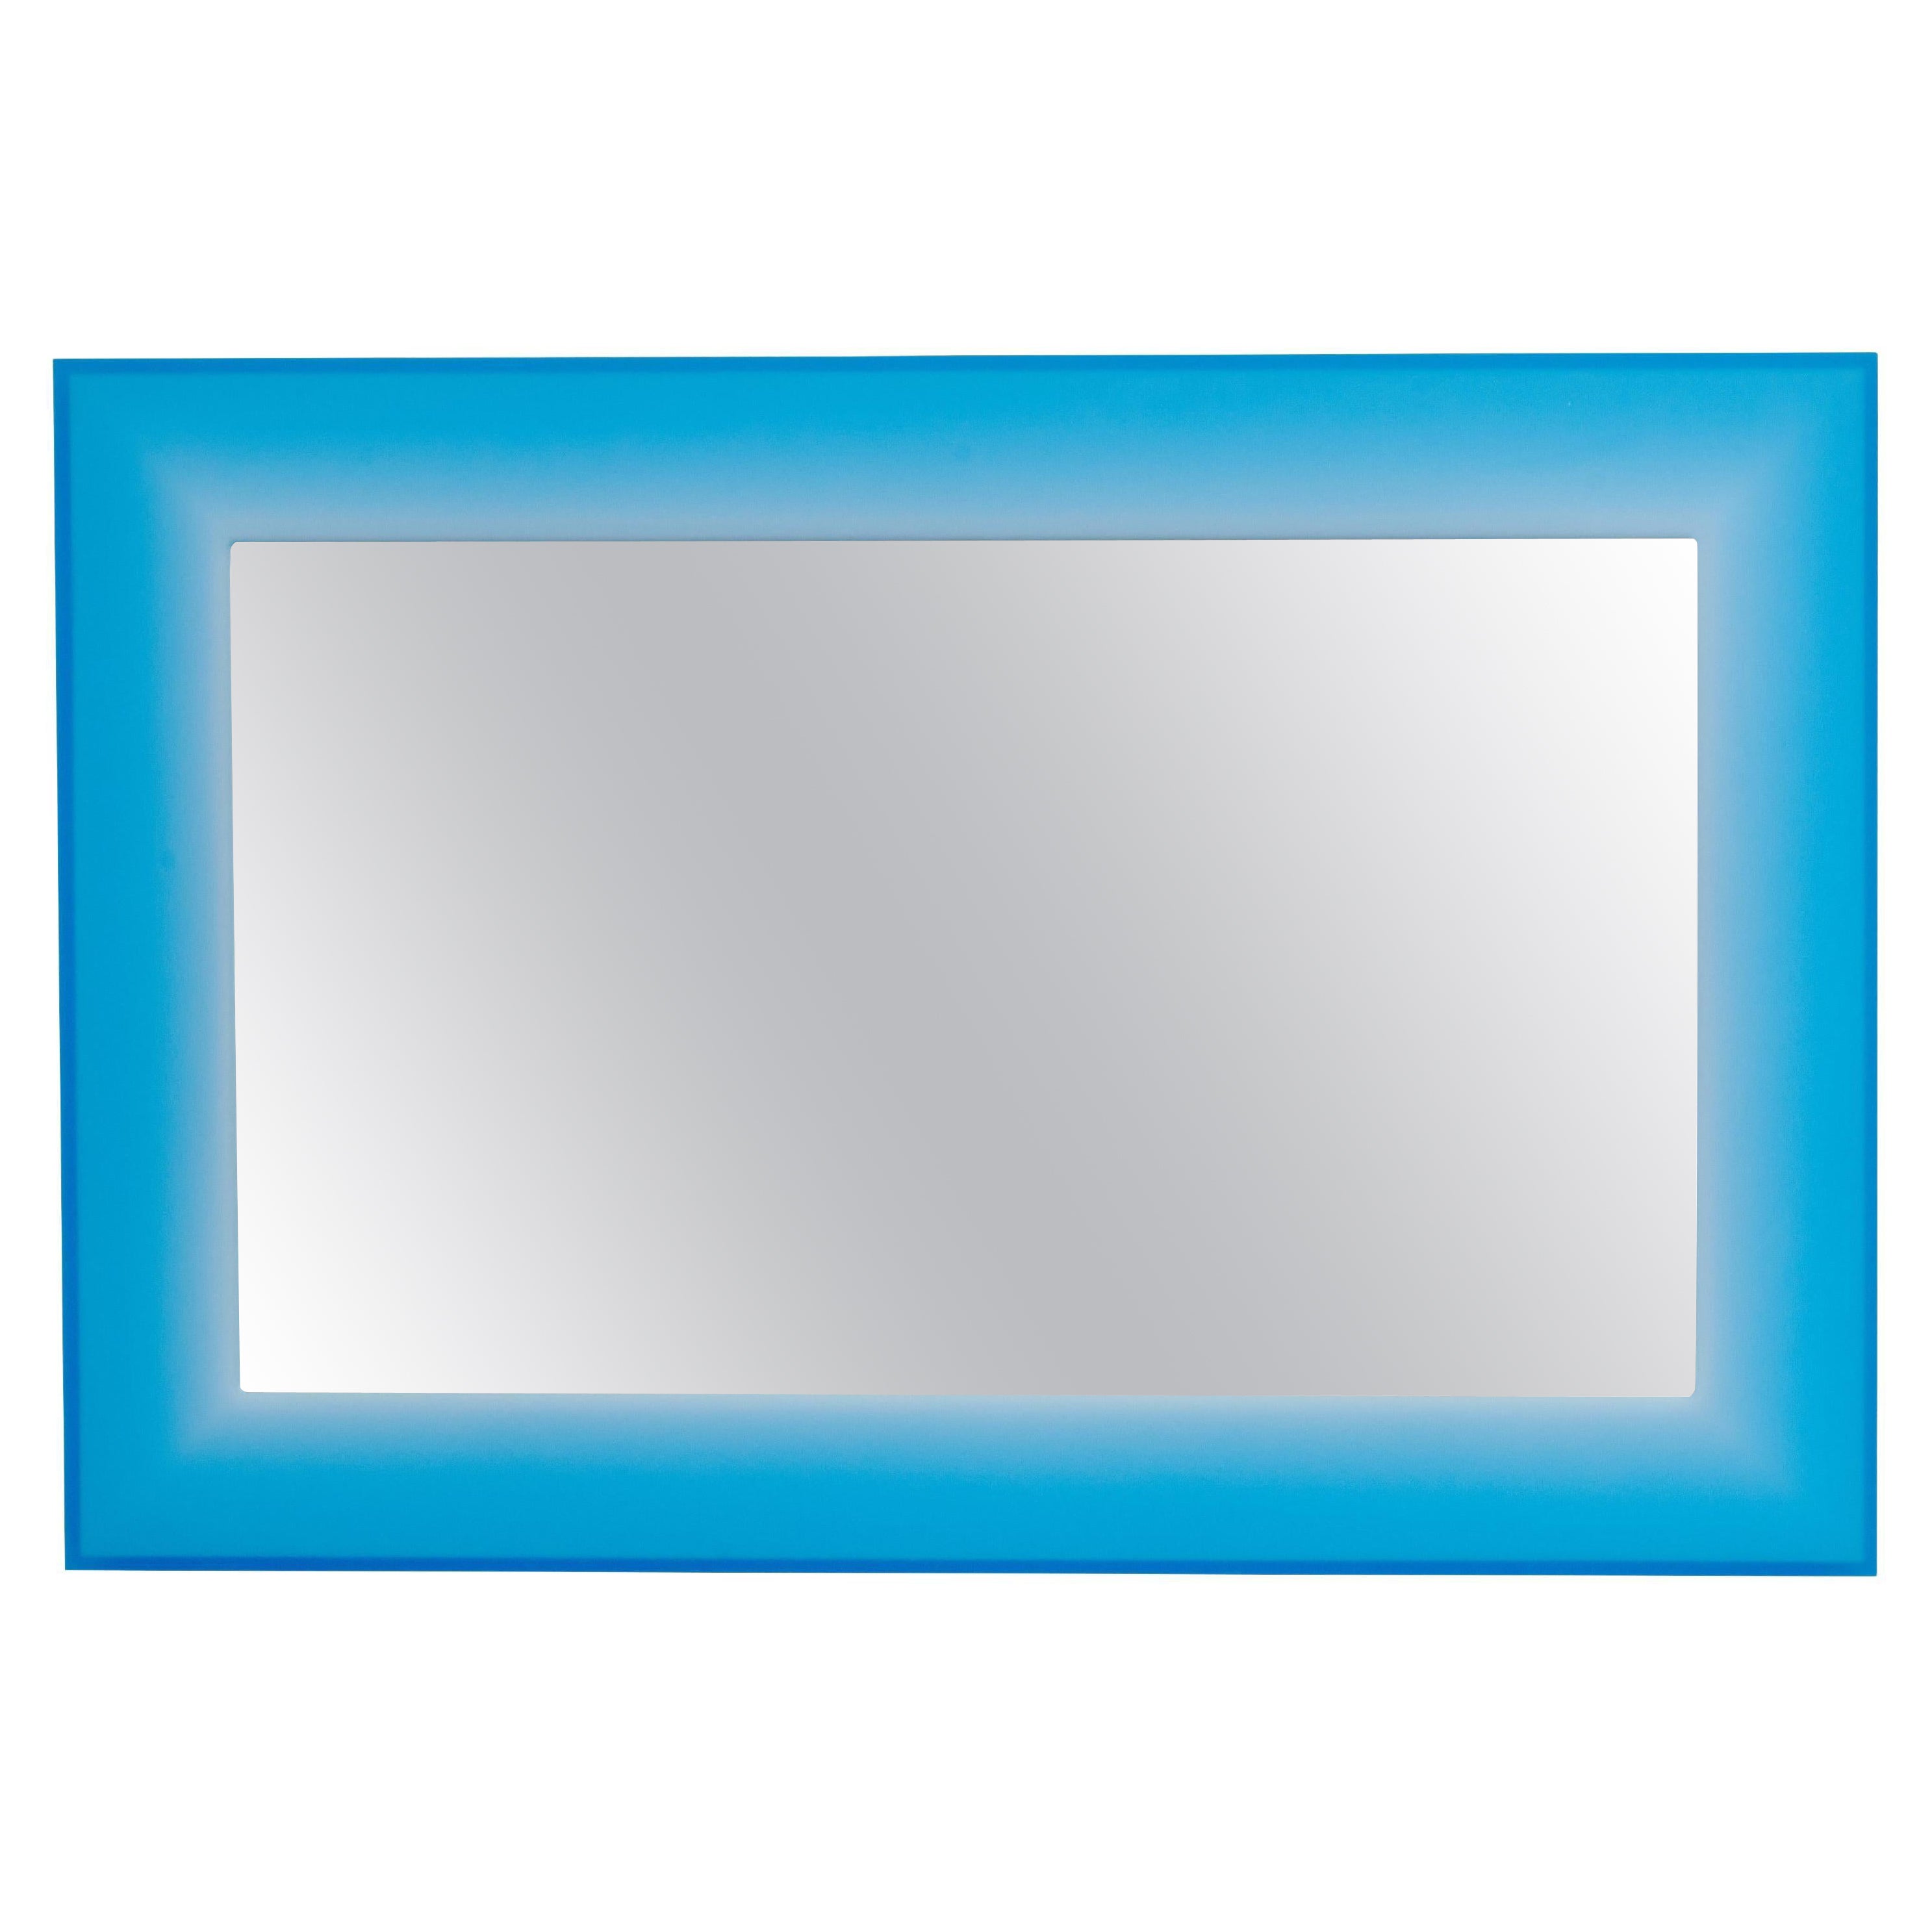 Rectangular Resin Mirror in Blue by Facture, Represented by Tuleste Factory For Sale